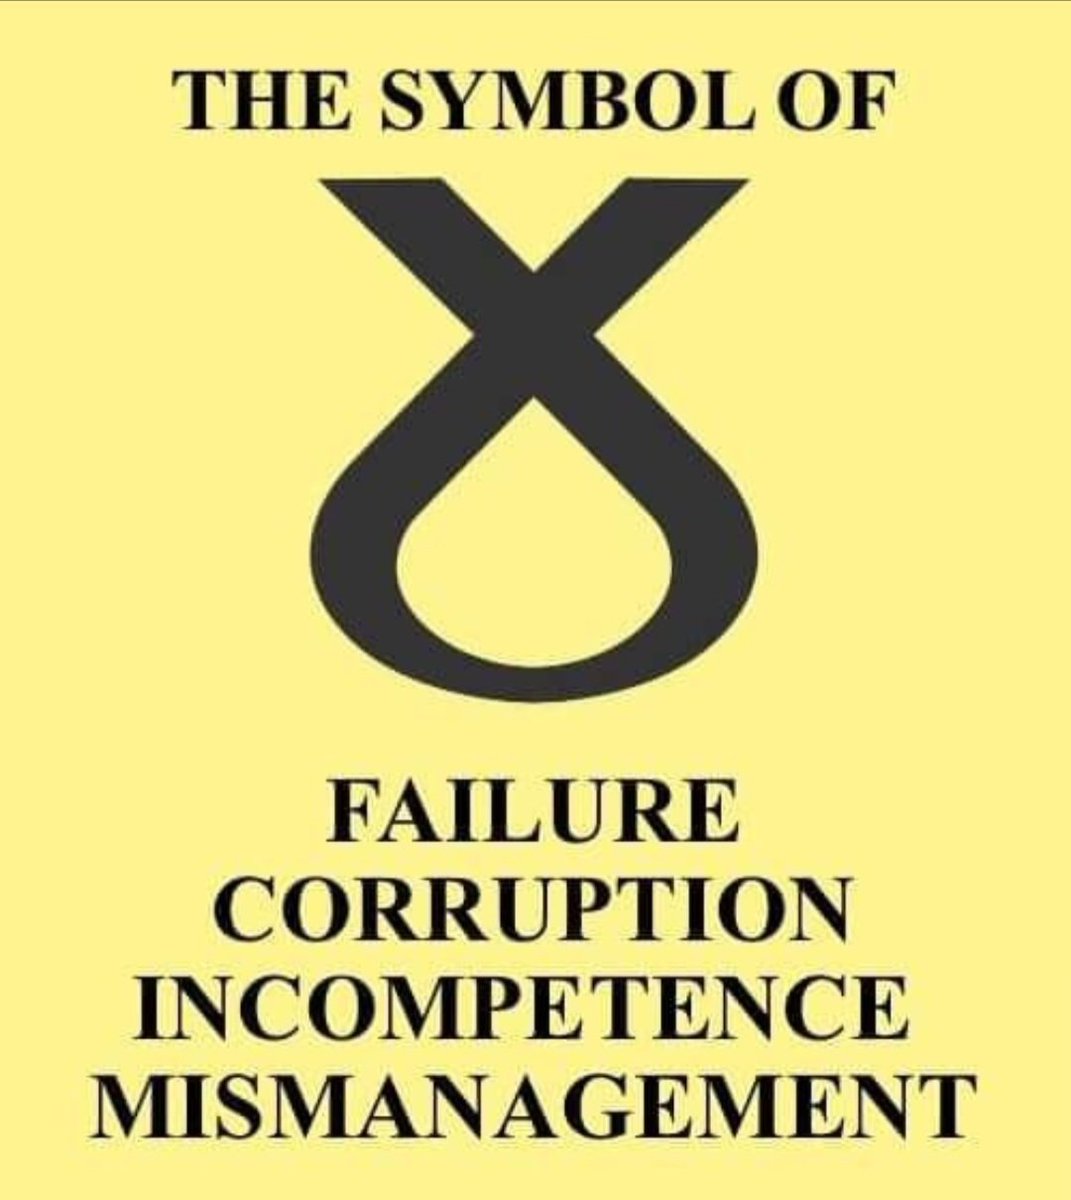 100% Correct & the Scottish public have had to pay for it.